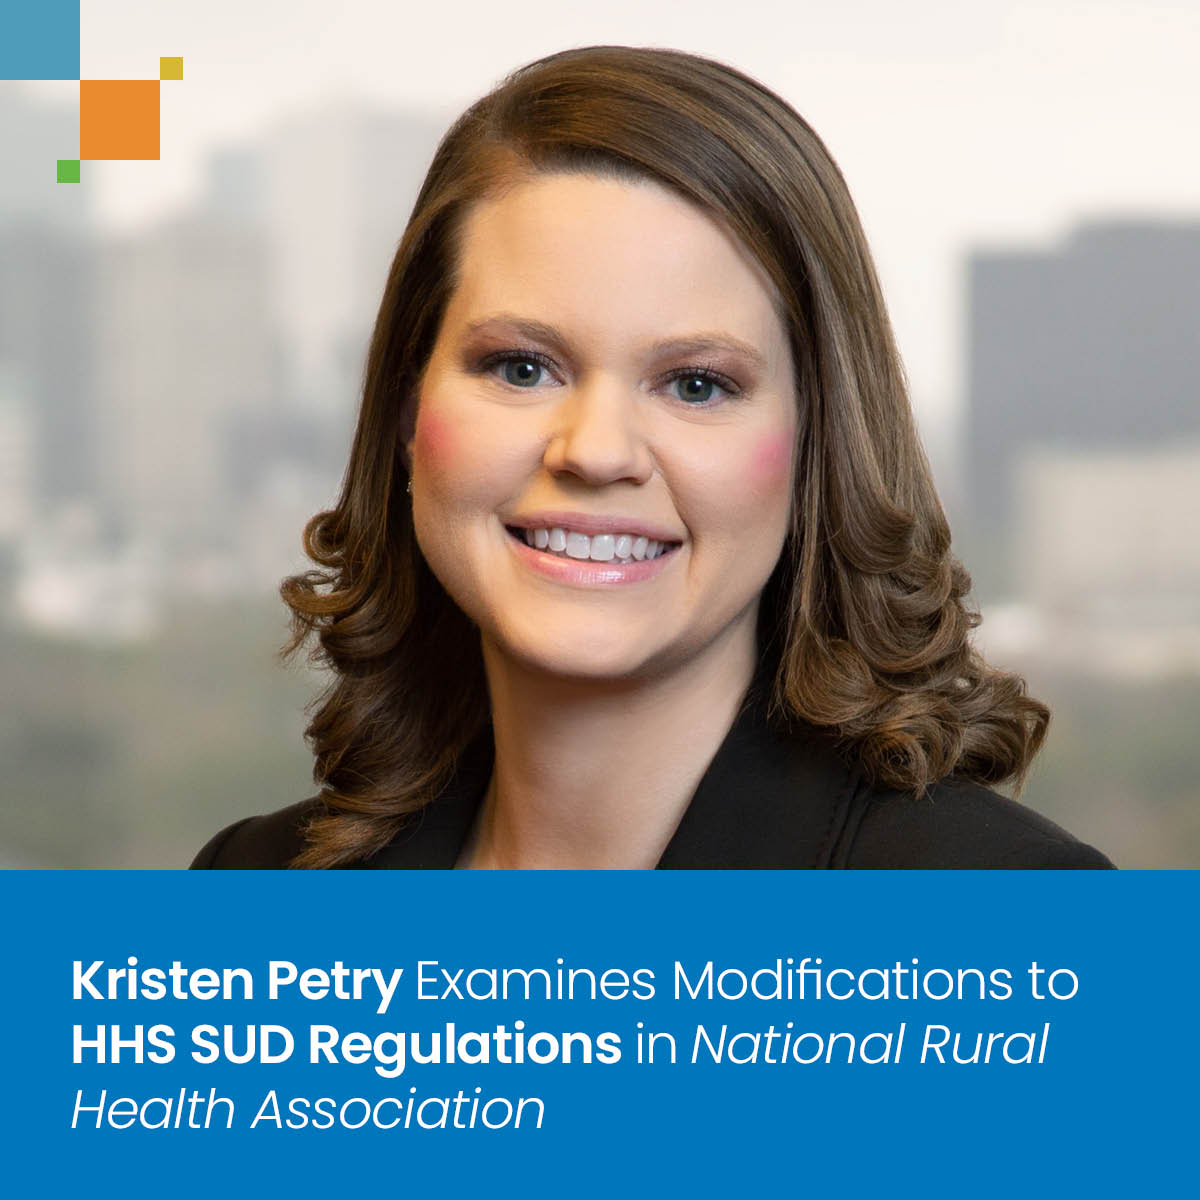 Kristen Petry Analyzes Changes to HHS SUD Regulations in National Rural Health Association Study